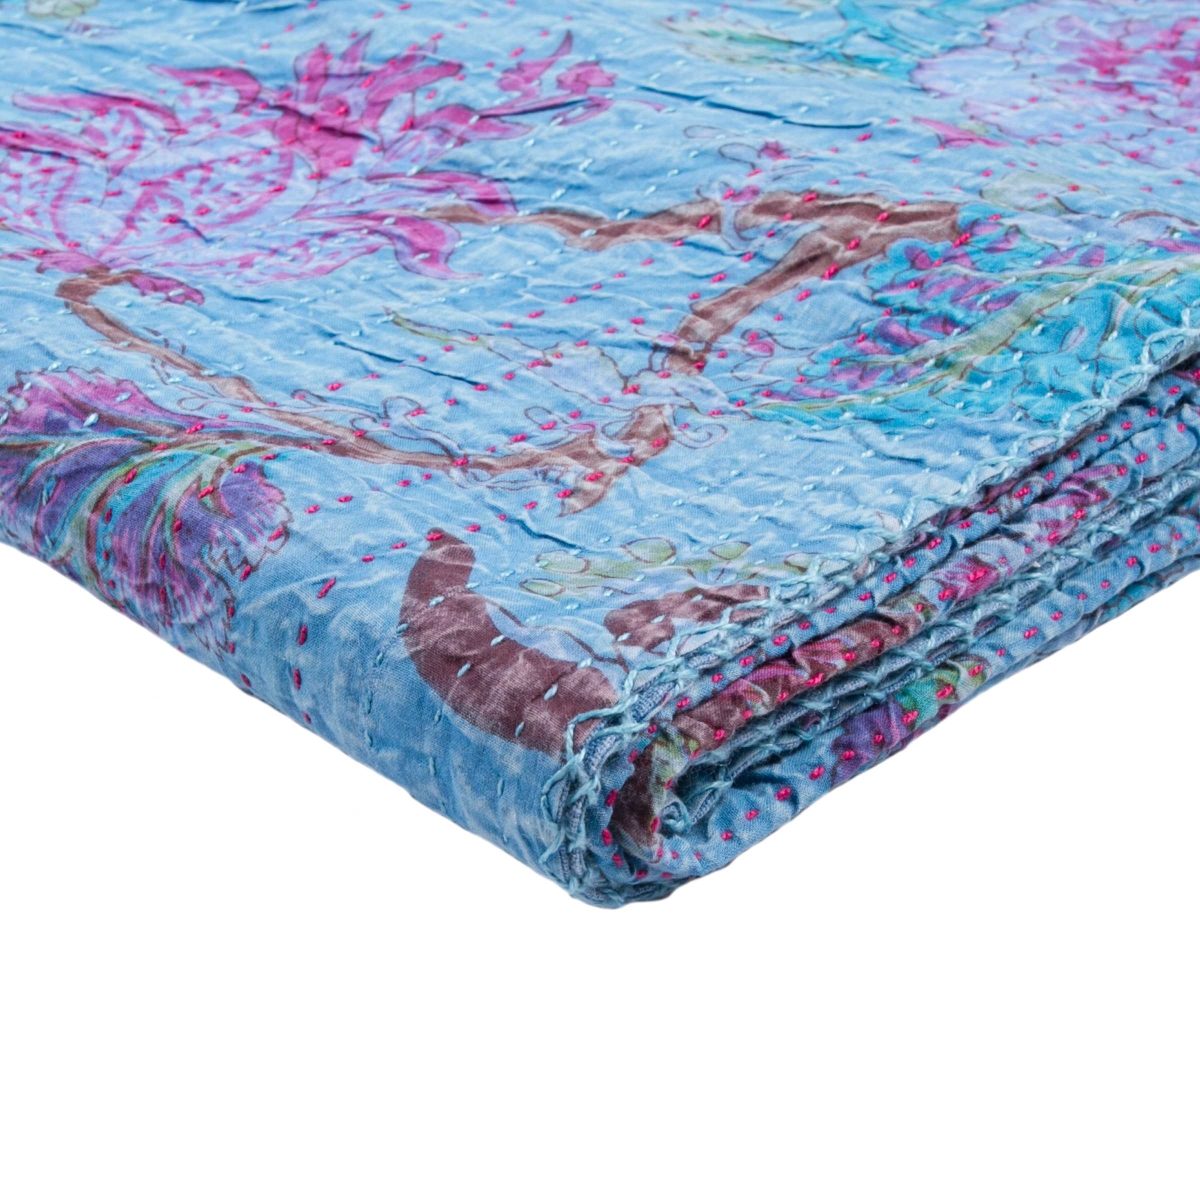 Home Roots Beddings 332336 Kantha Cotton Throw - 1117-no.04, Multicolor - 50 X 70 In.